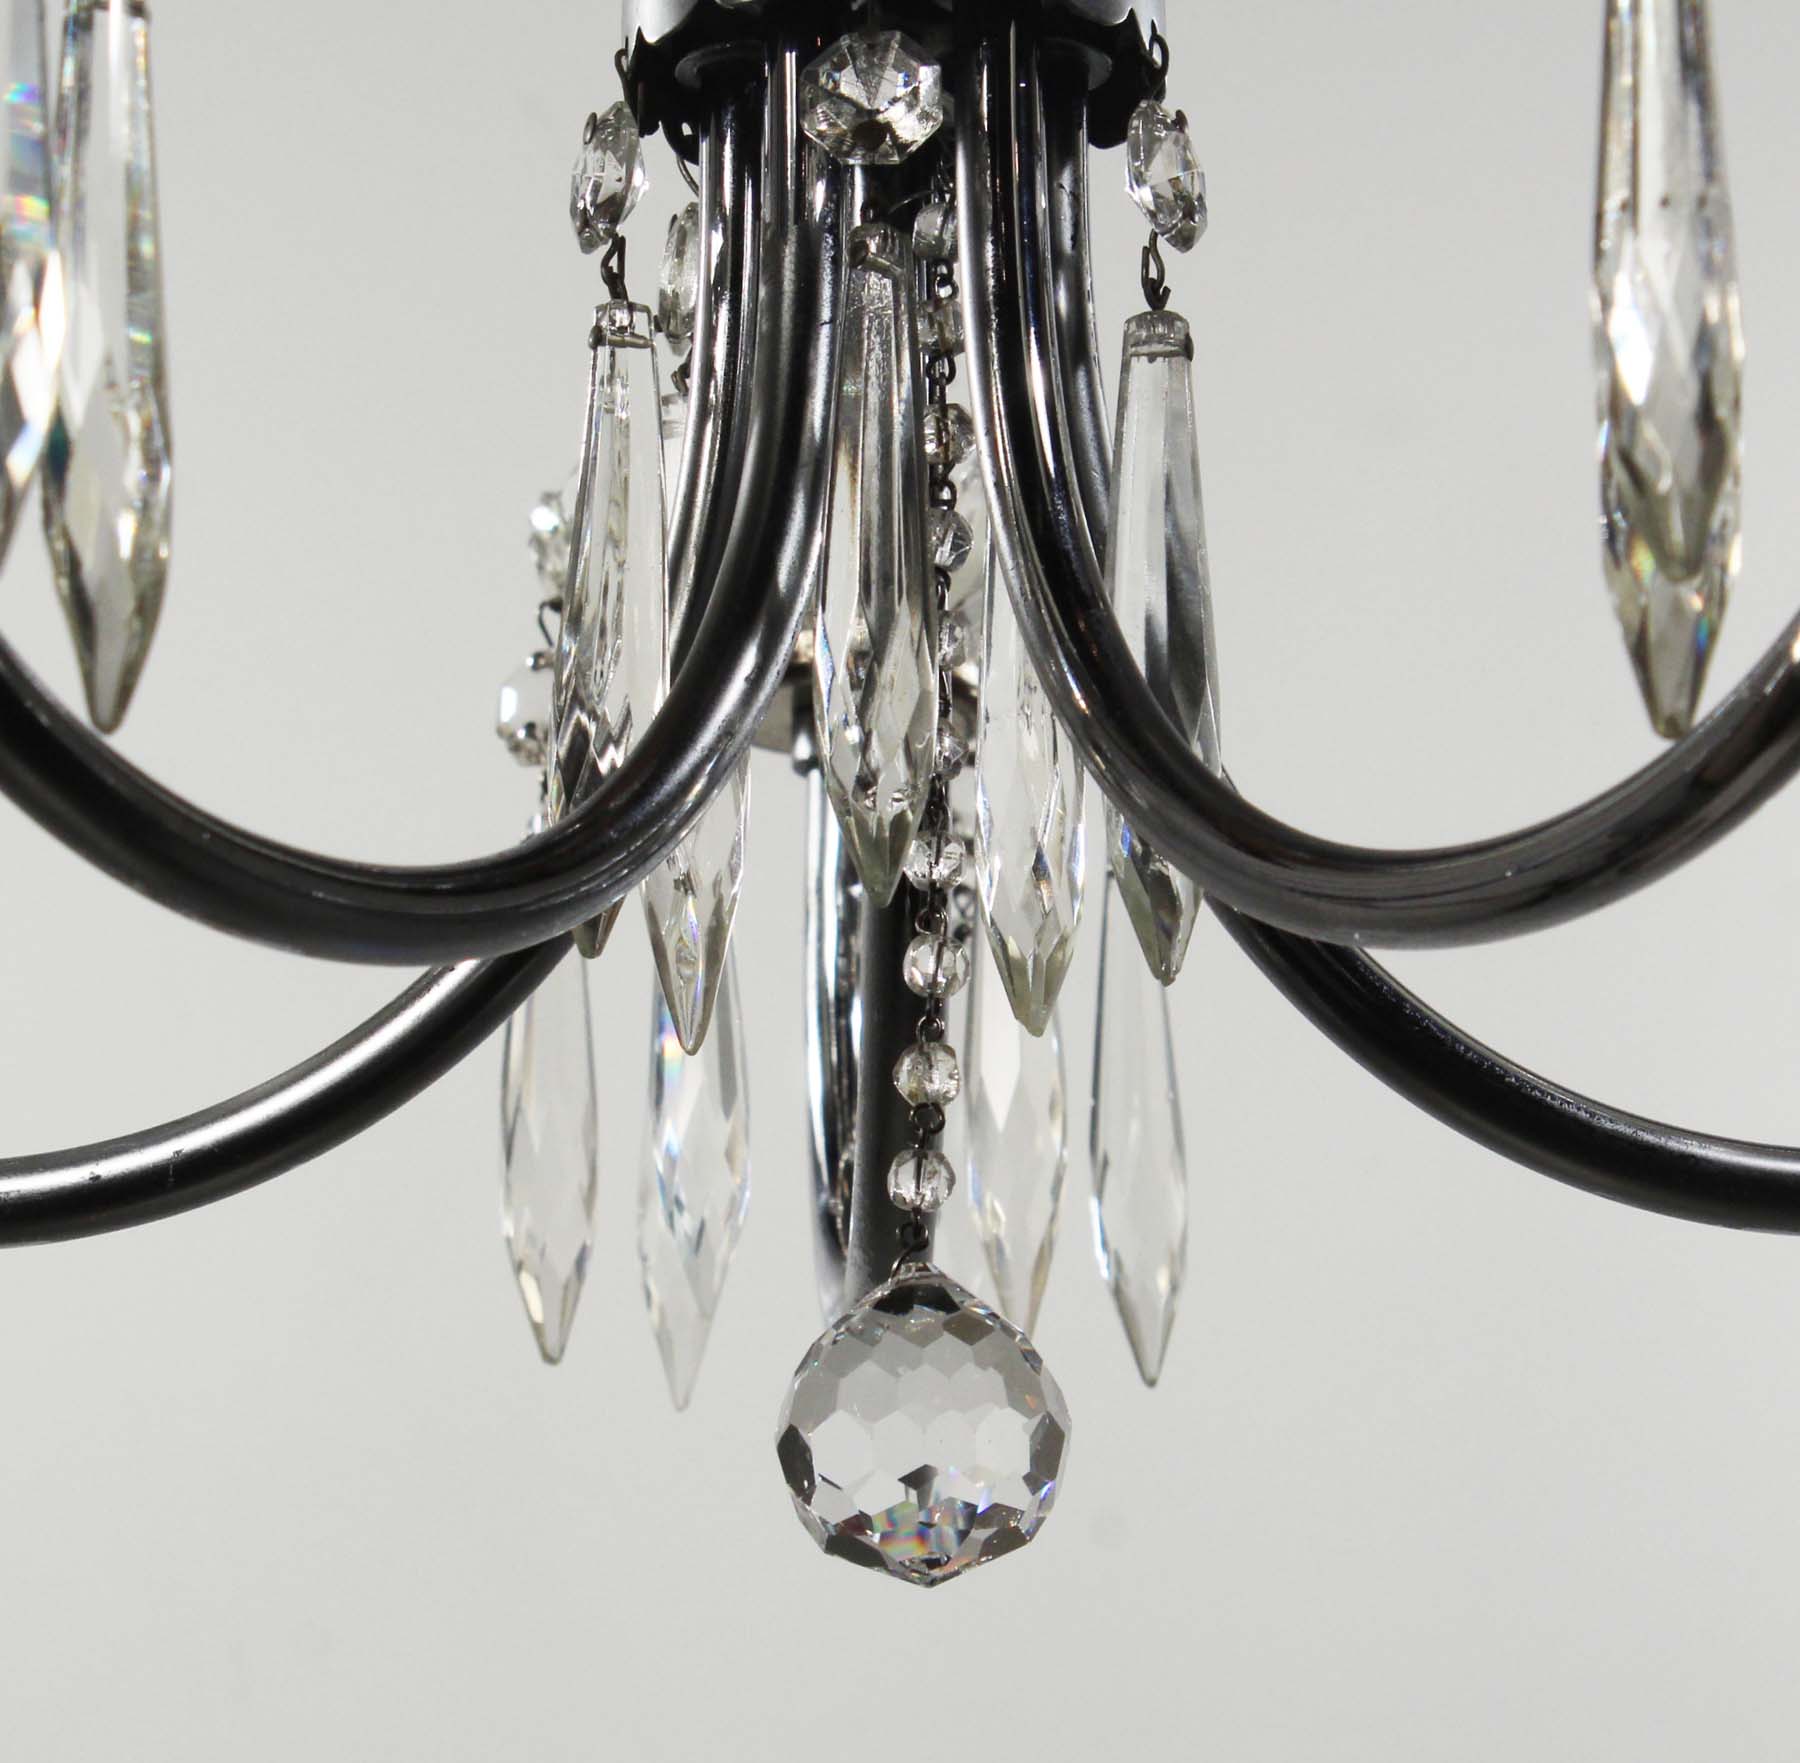 SOLD Antique Five-Light Chandelier with Prisms, Early 1900’s-68767